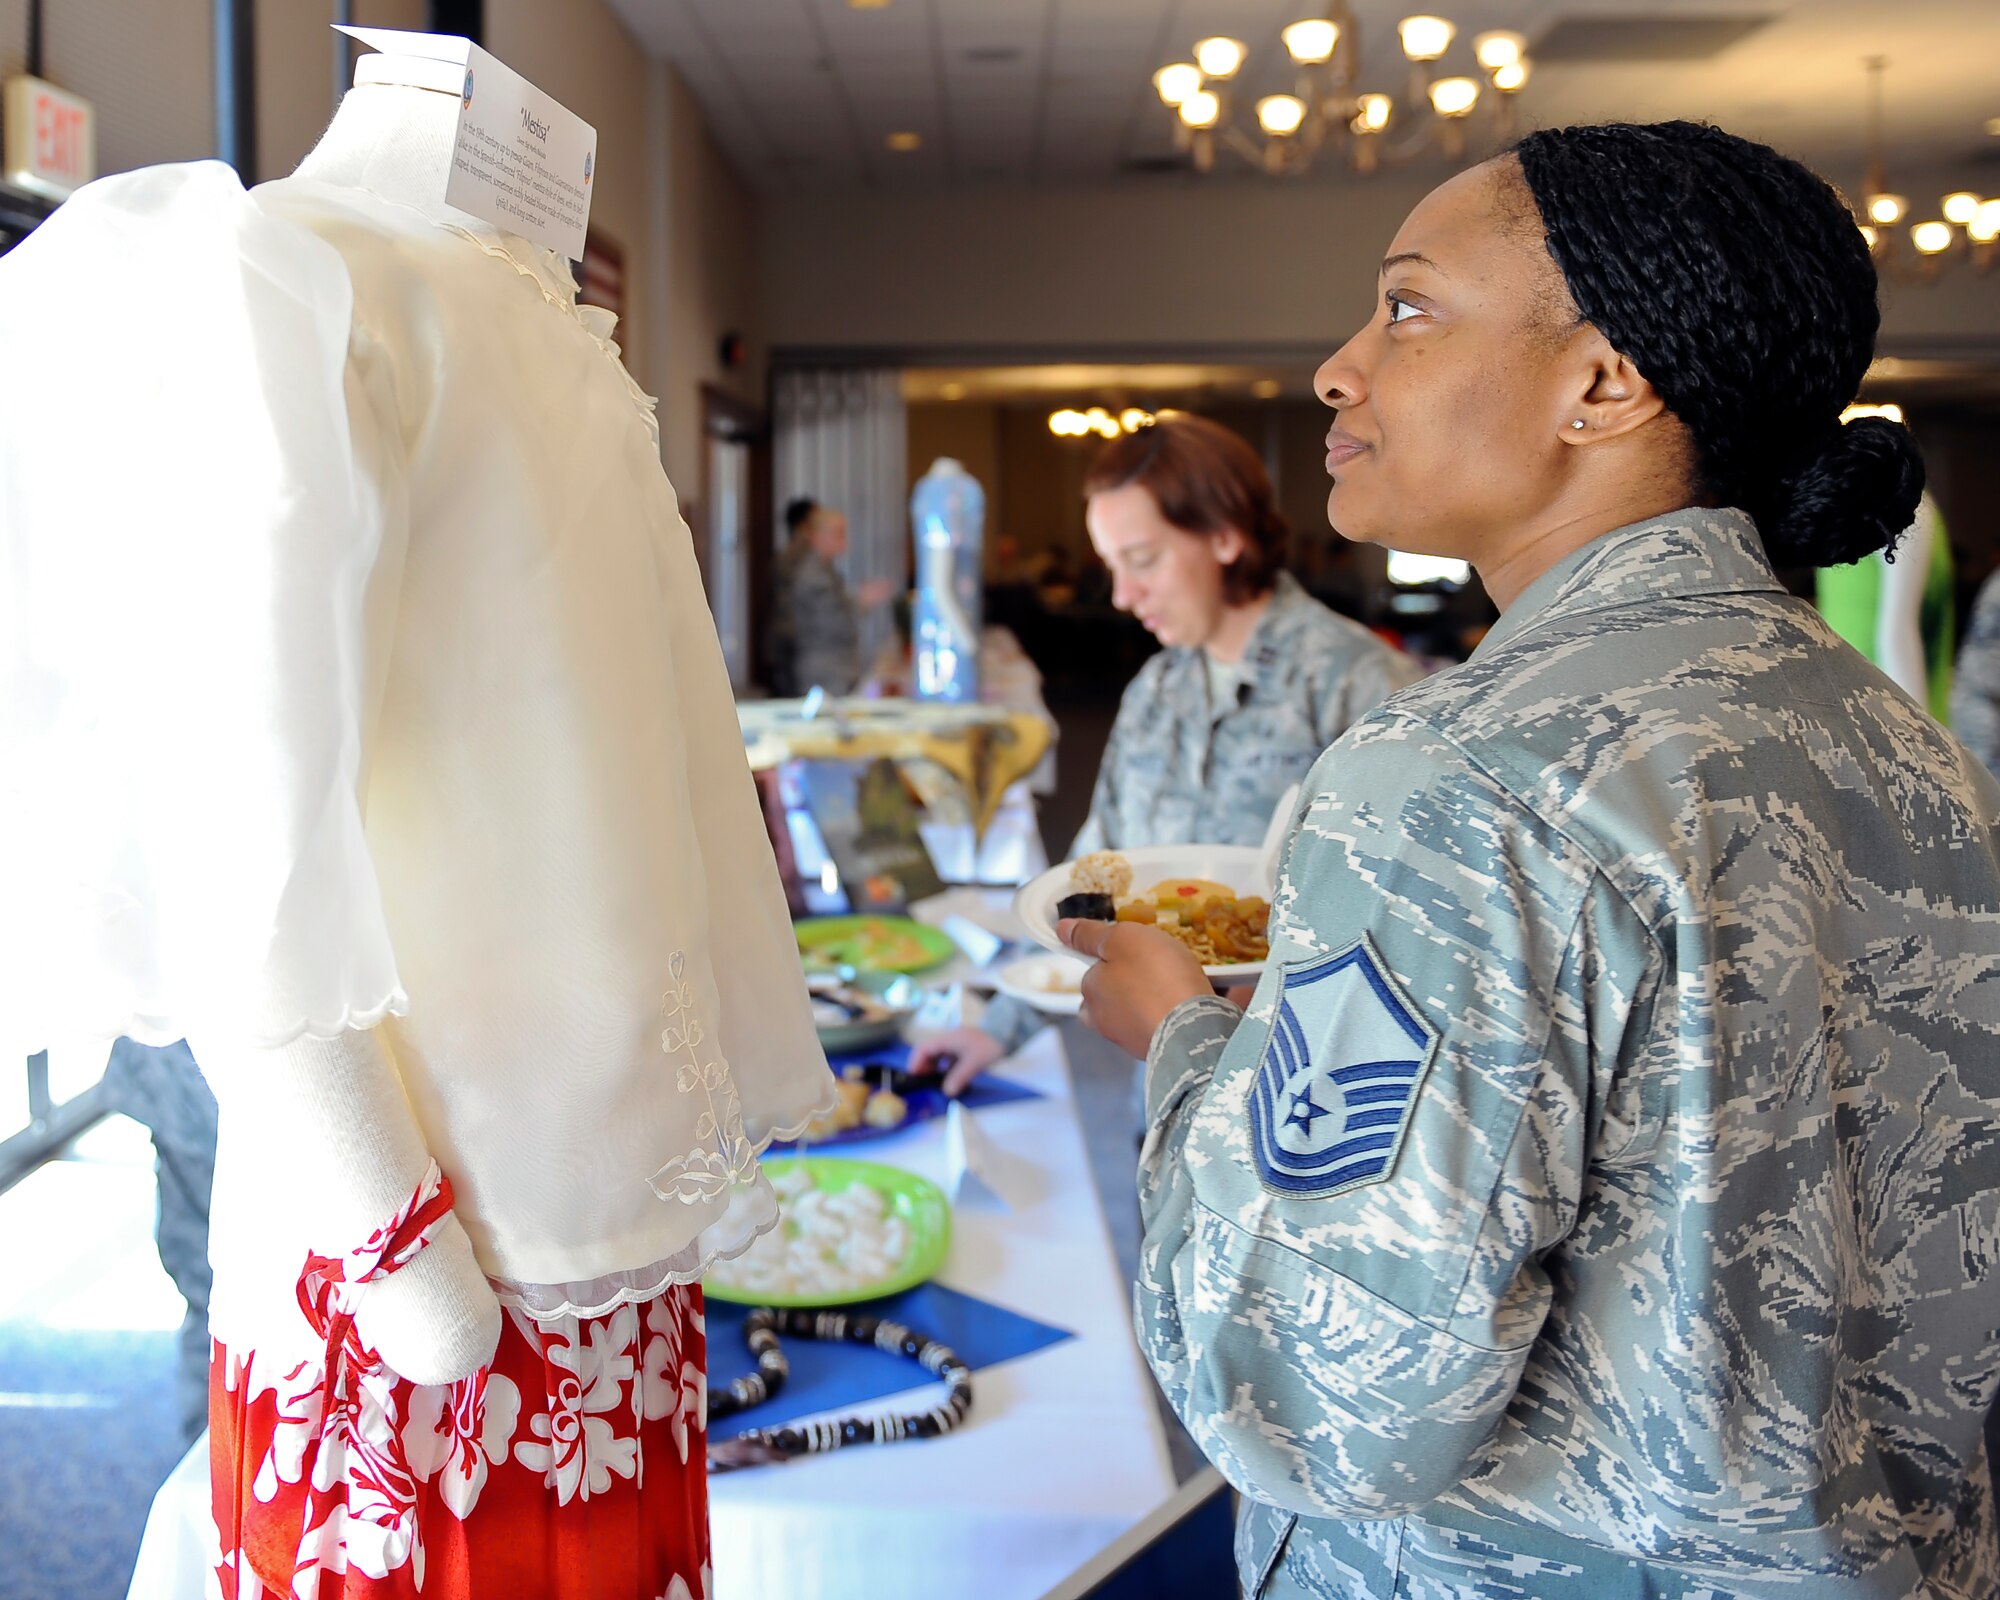 U.S. Air Force Master Sgt. Lashelle Bullock, 7th Aerospace Medicine Squadron medical services flight chief, views a mestiza at the Tour of Asia and the Pacific Islands Art Expo May 8, 2014, at Dyess Air Force Base, Texas. In the 19th century, Filipino and Guamanian women dressed alike in the Spanish-influenced, Filipino-style of dress. The bell-shaped, transparent and intricate blouse is made of pineapple fiber. (U.S. Air Force photo by Airman 1st Class Kedesha Pennant/Released)